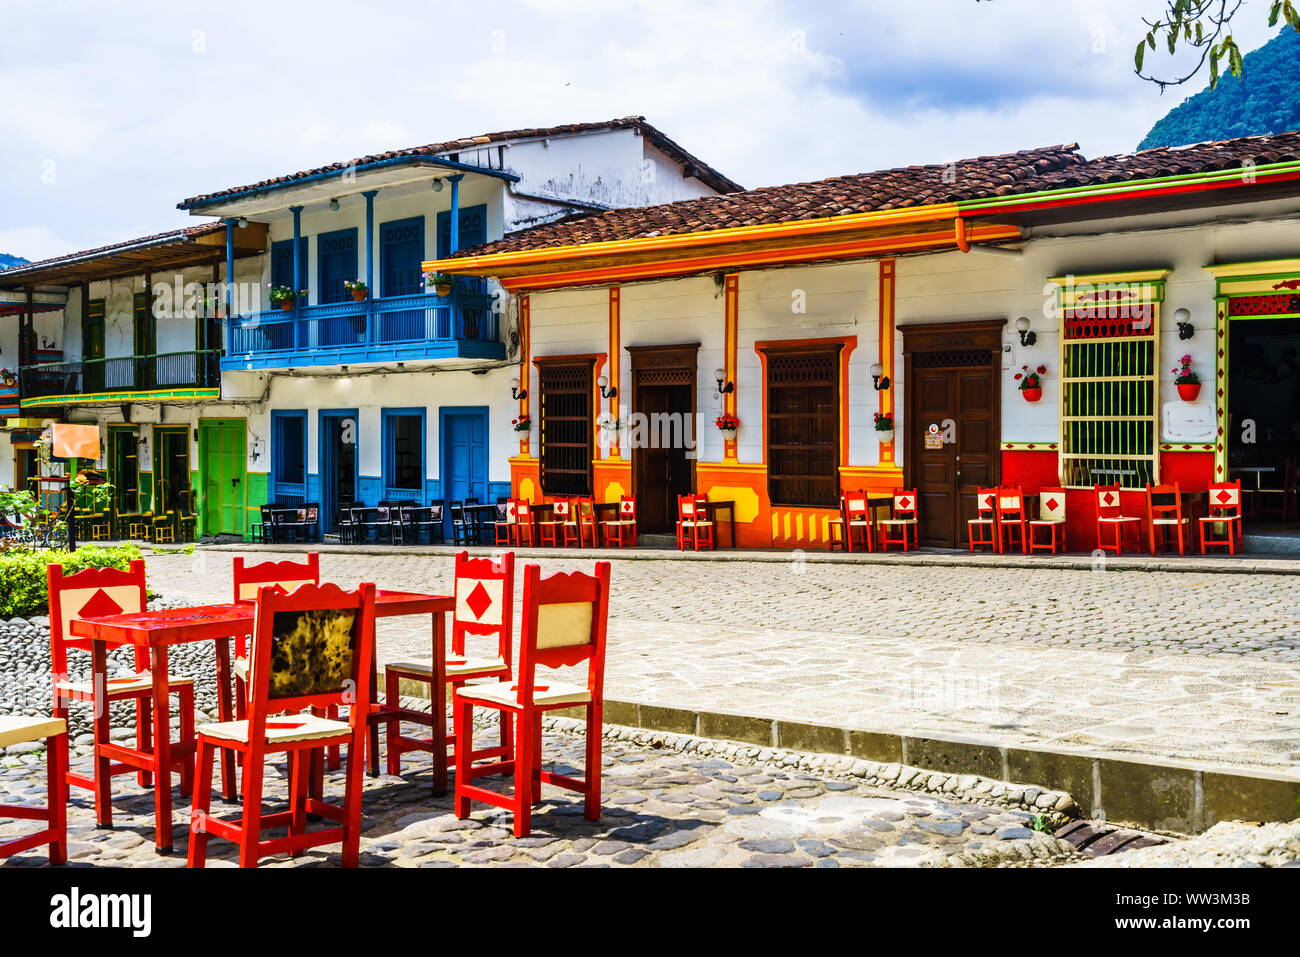 View on colonial architecture in the picturesque town of Jardin, Antioquia, Colombia Stock Photo